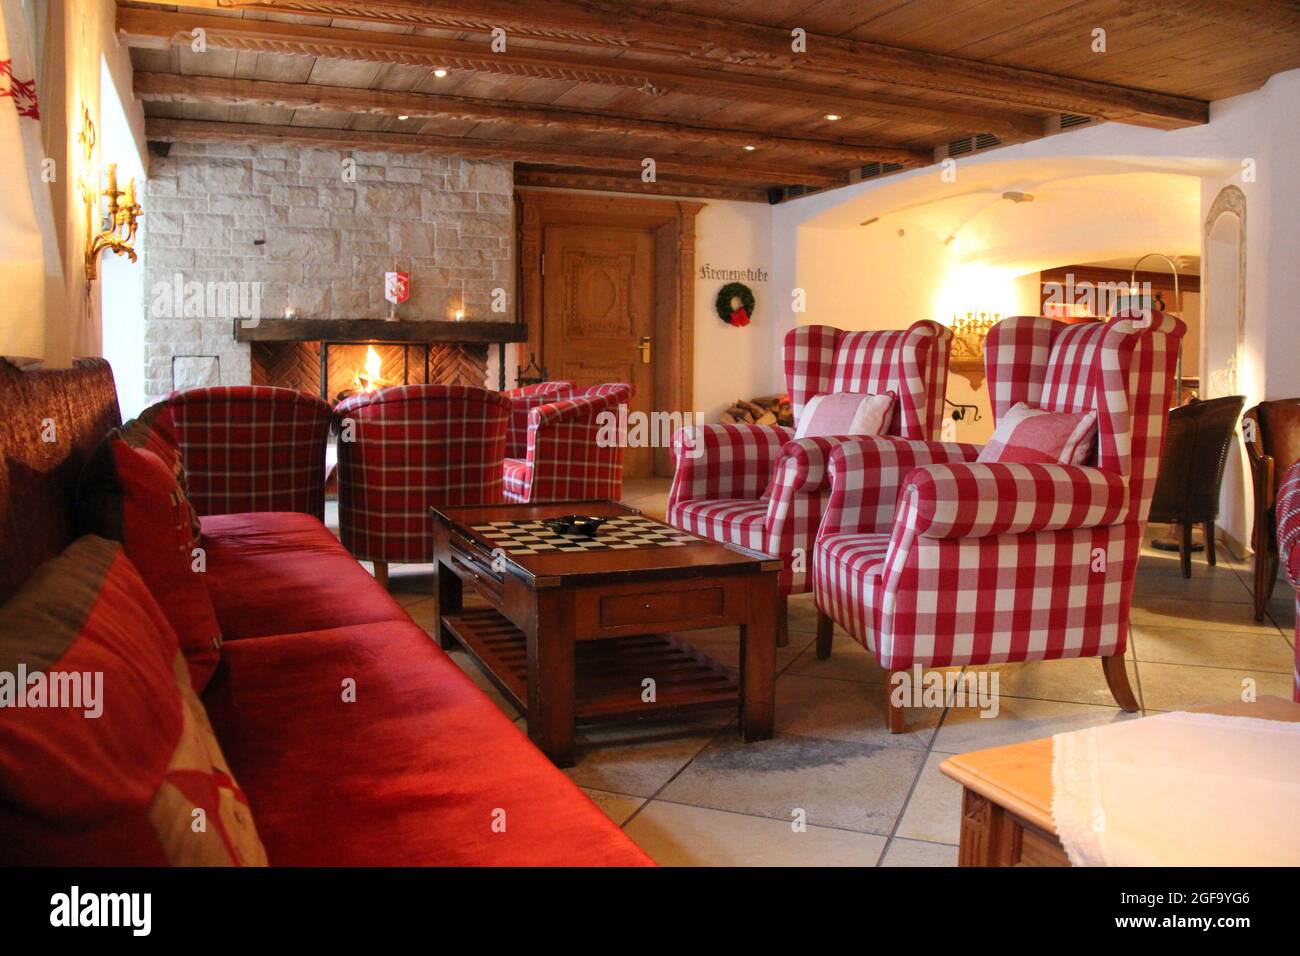 Lech, Austria - 03 18 2018: Cosy Mountain House Interior with Armchairs and Fireplace Stock Photo